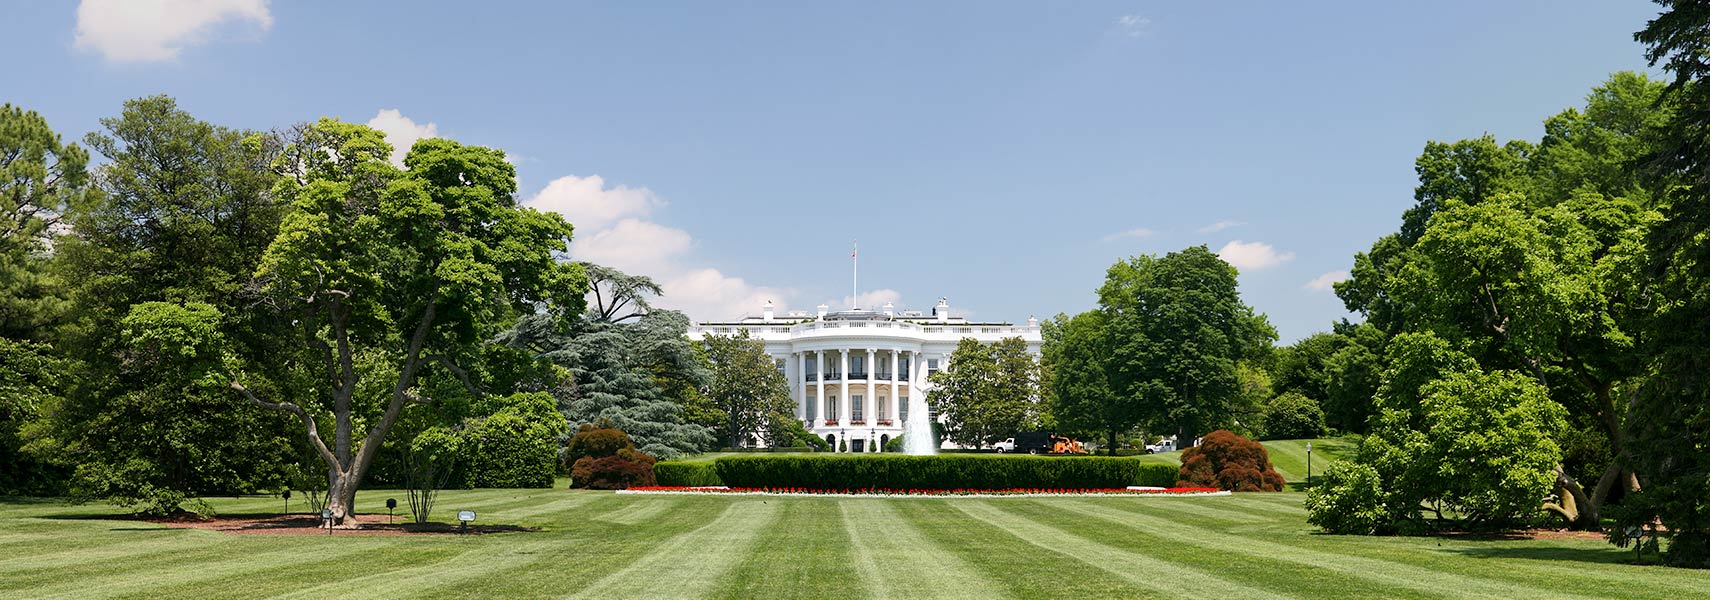 The White House, southern facade and lawn